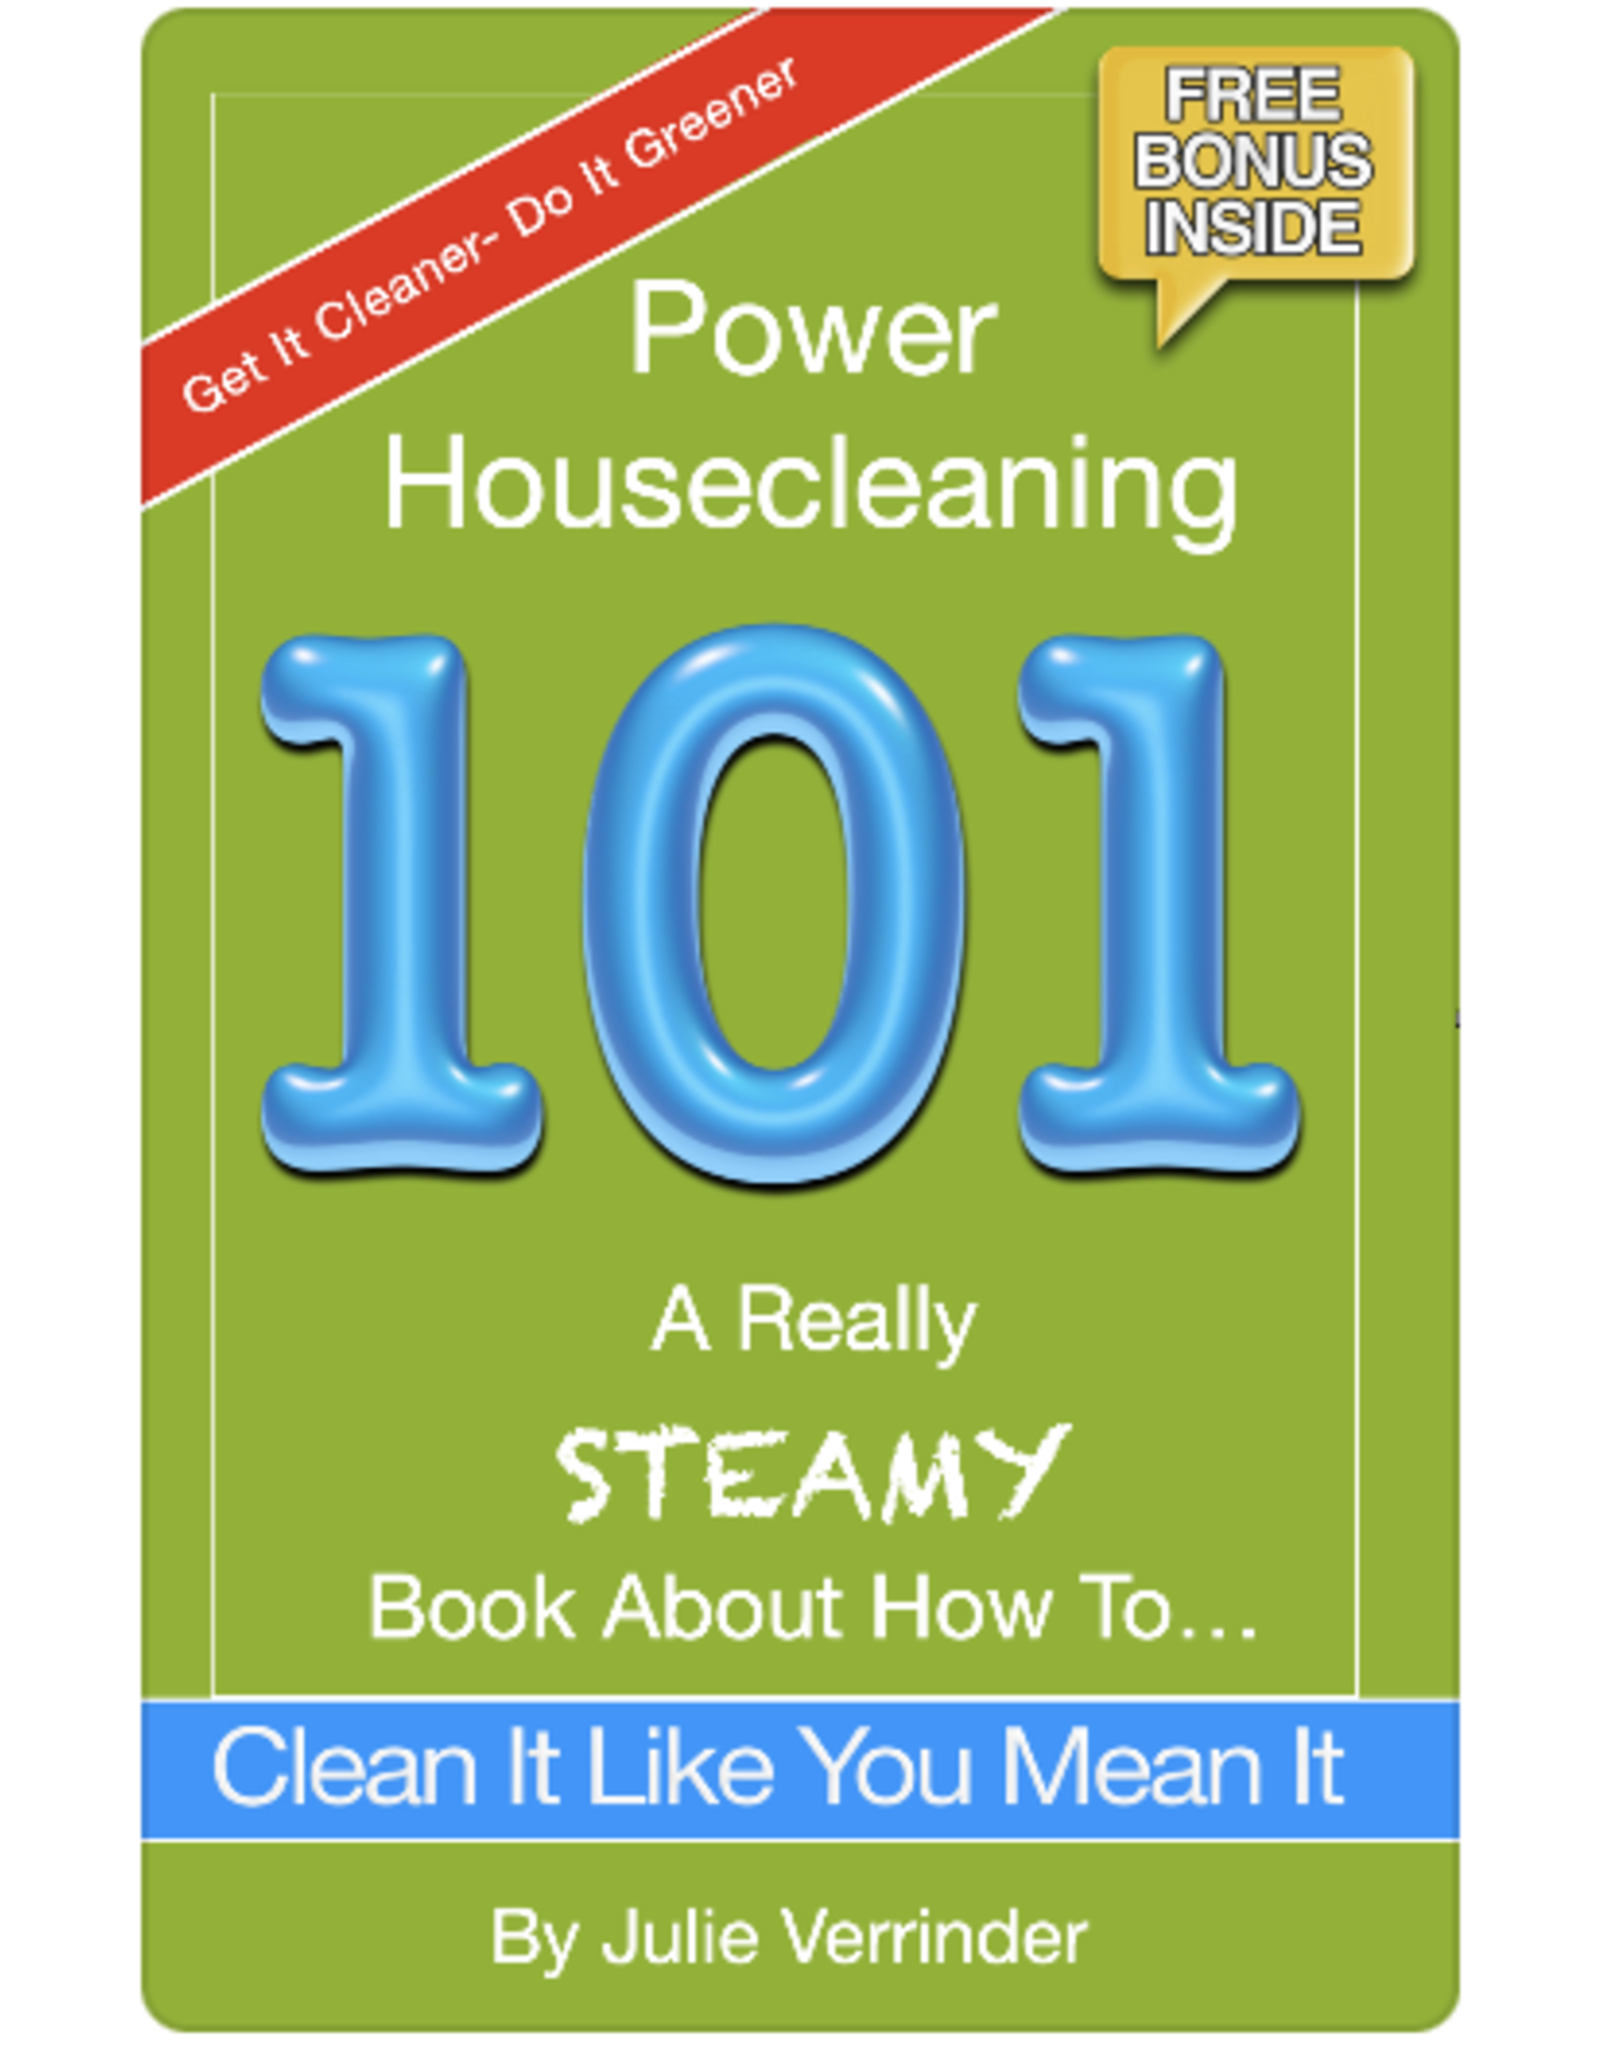 Sargent Steam Cleaners POWER HOUSE CLEANING 101